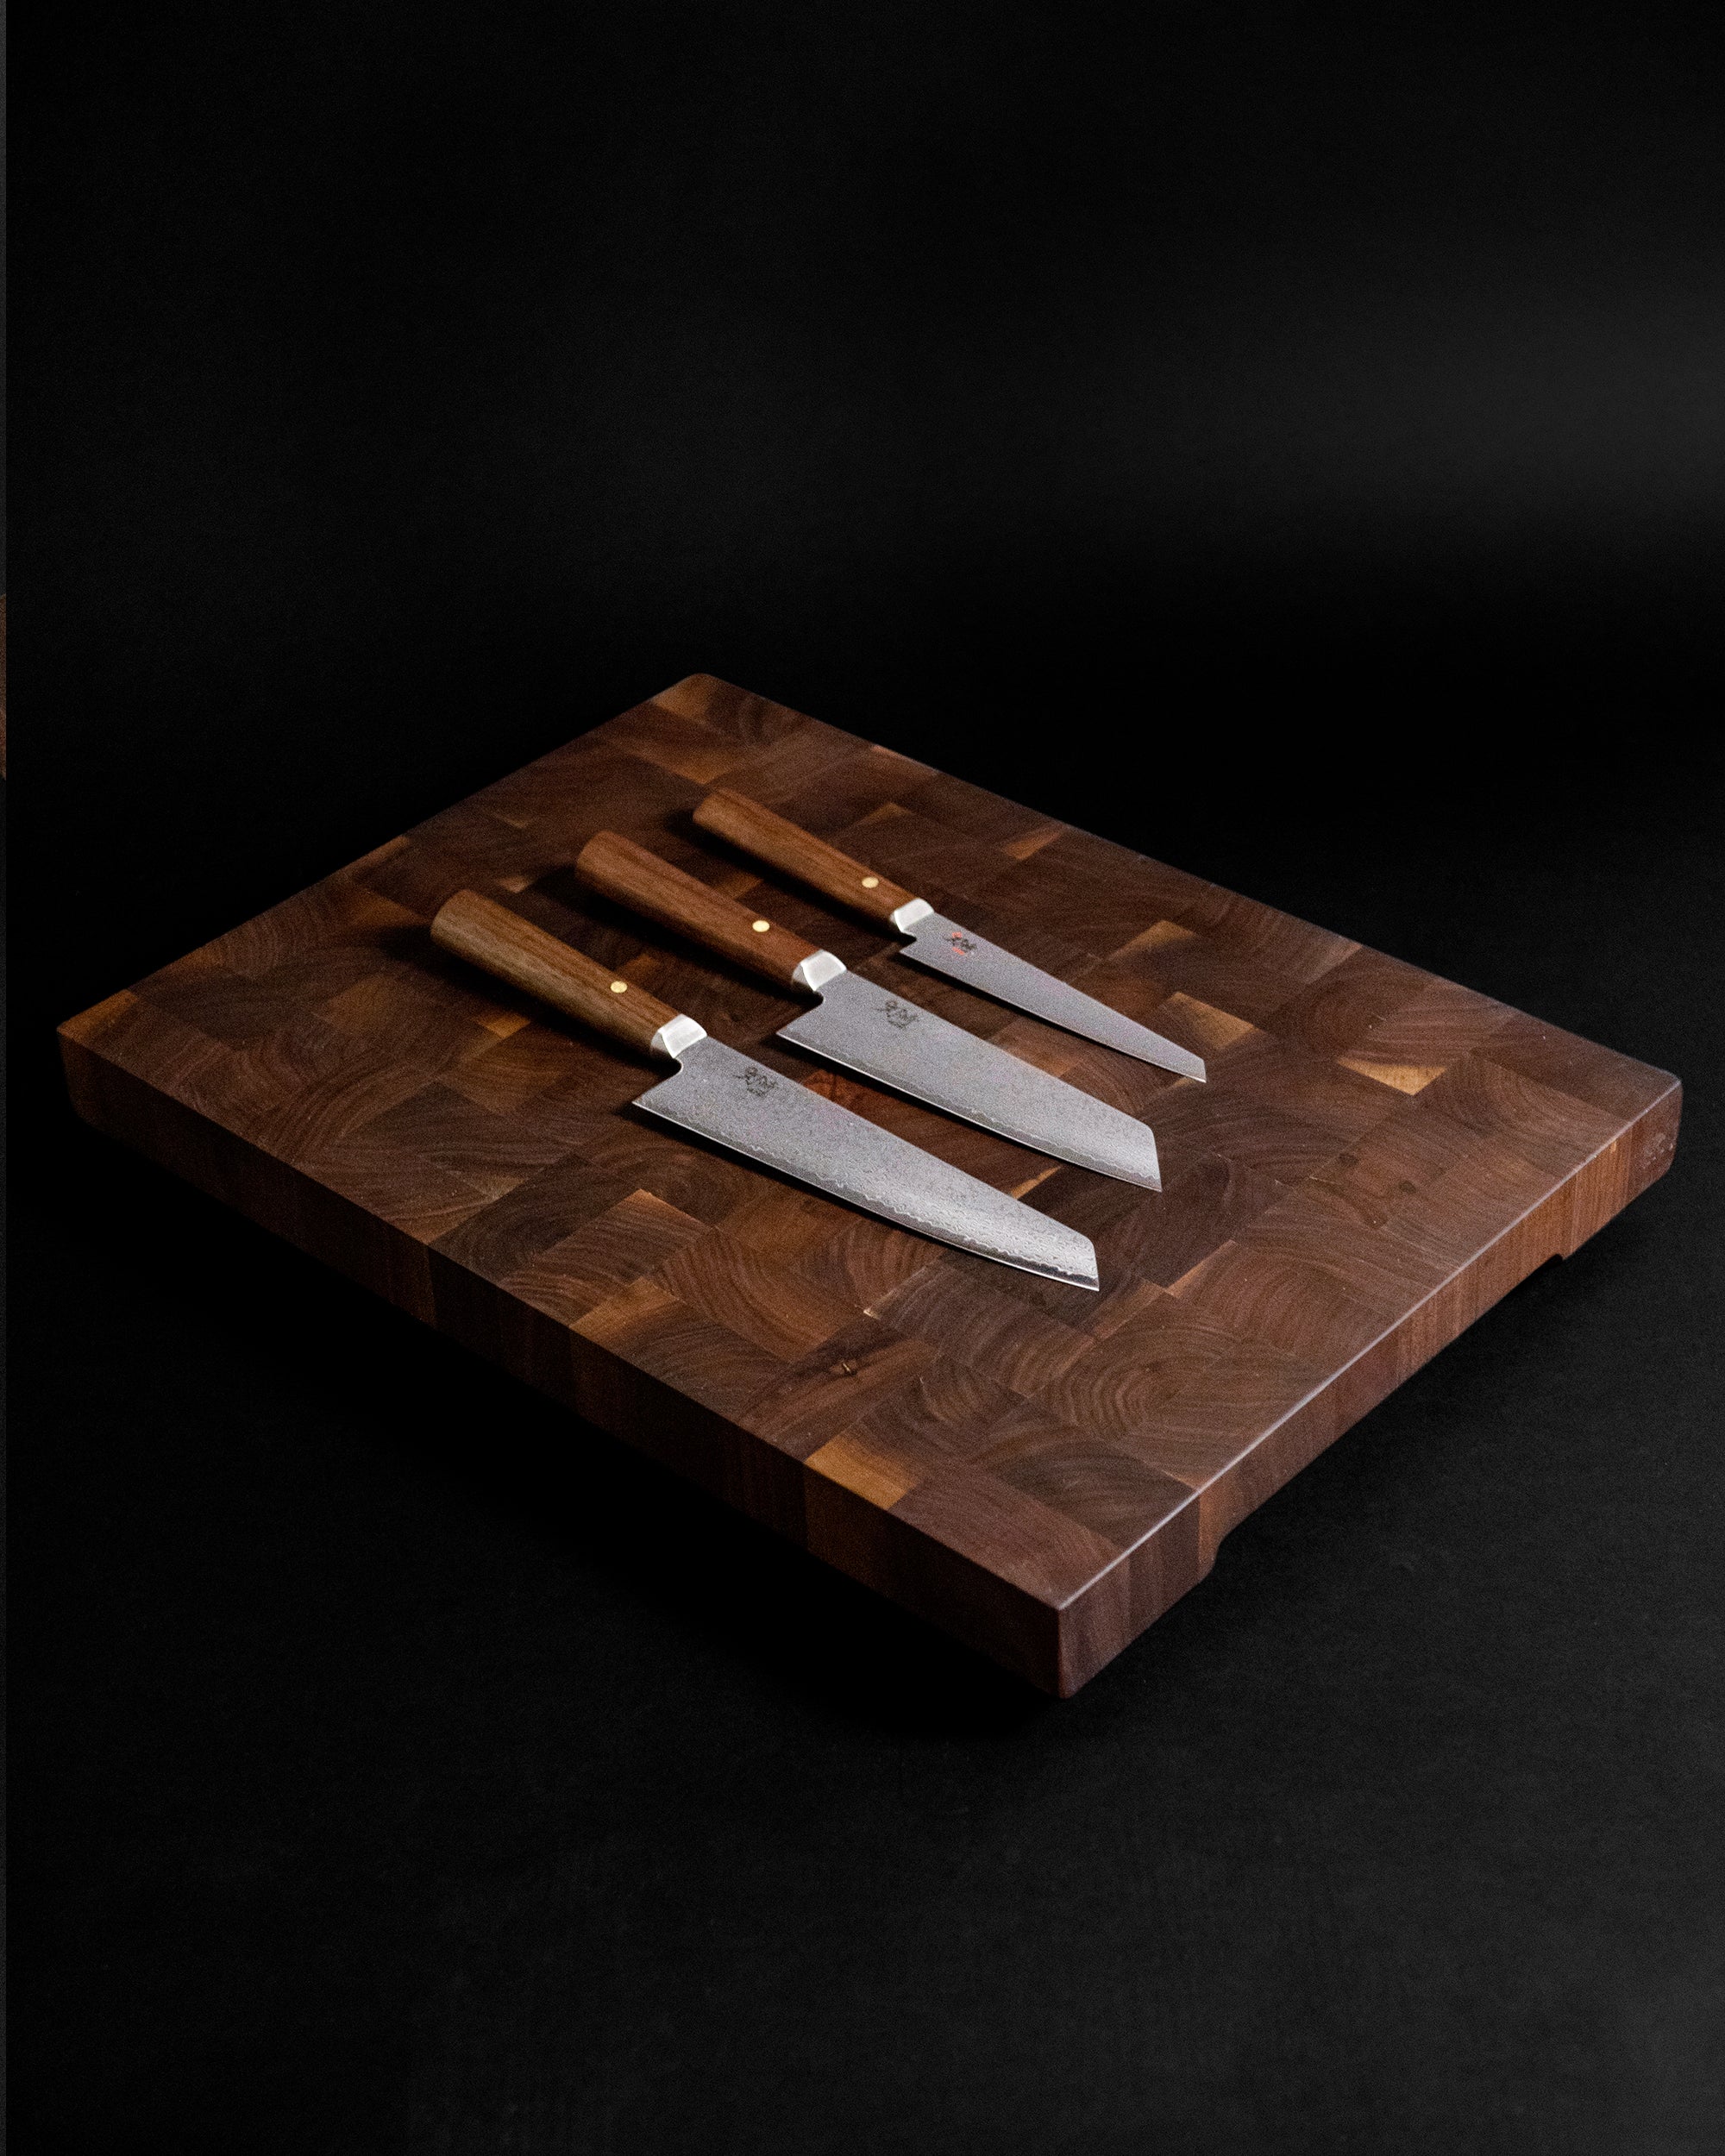 The Stowaway System Combines a Fillet Knife and Folding Cutting Board